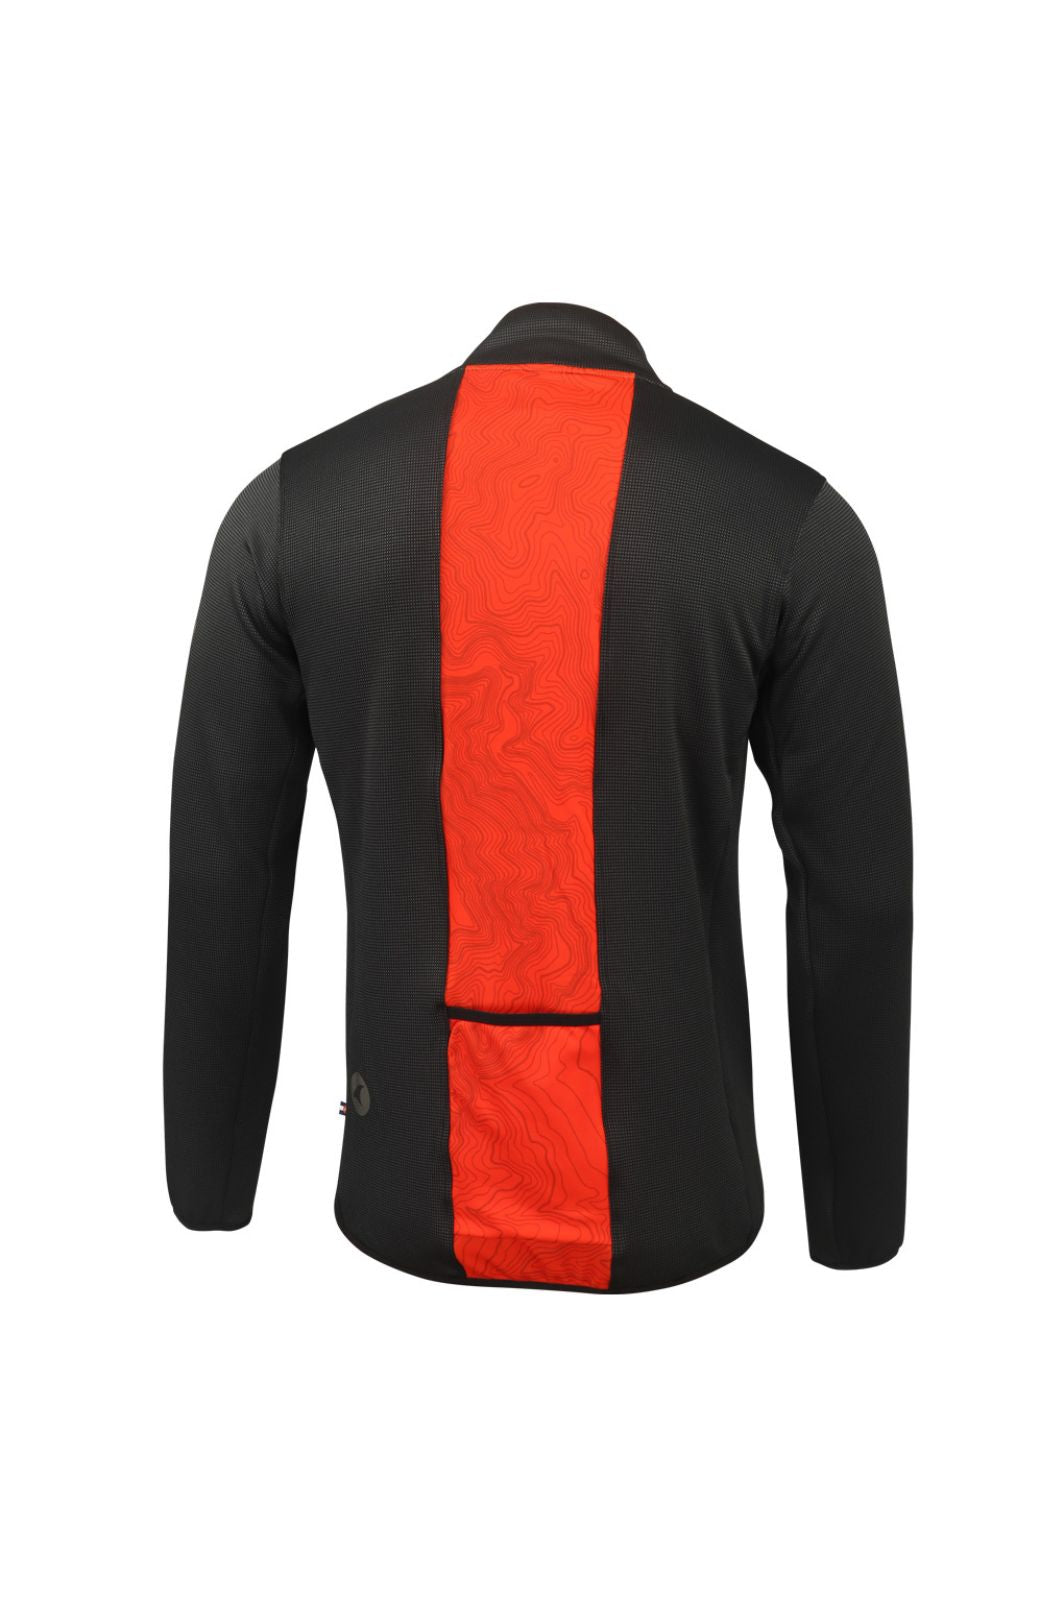 Men's Red Cycling Track Jacket - Back View